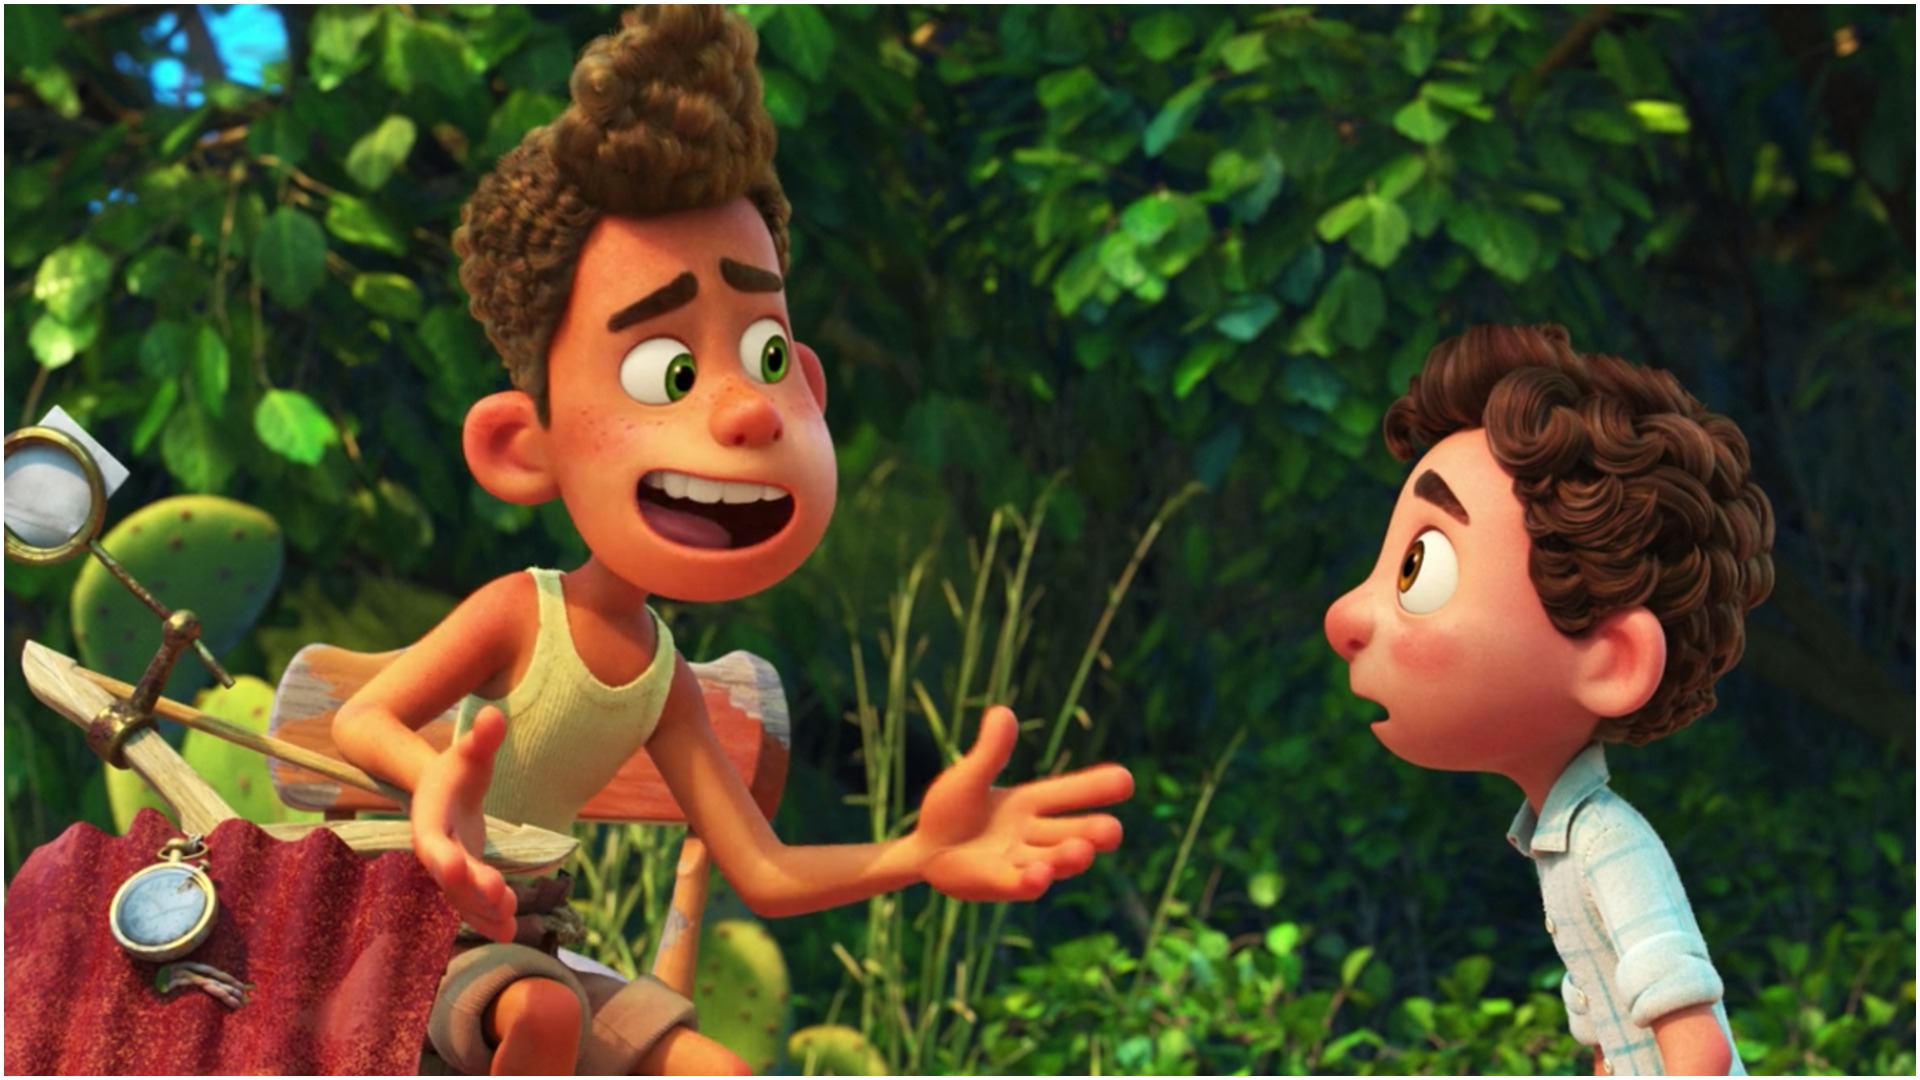 Silenzio Bruno! Luca director explains the meaning behind the Pixar movie's marvelous mantra